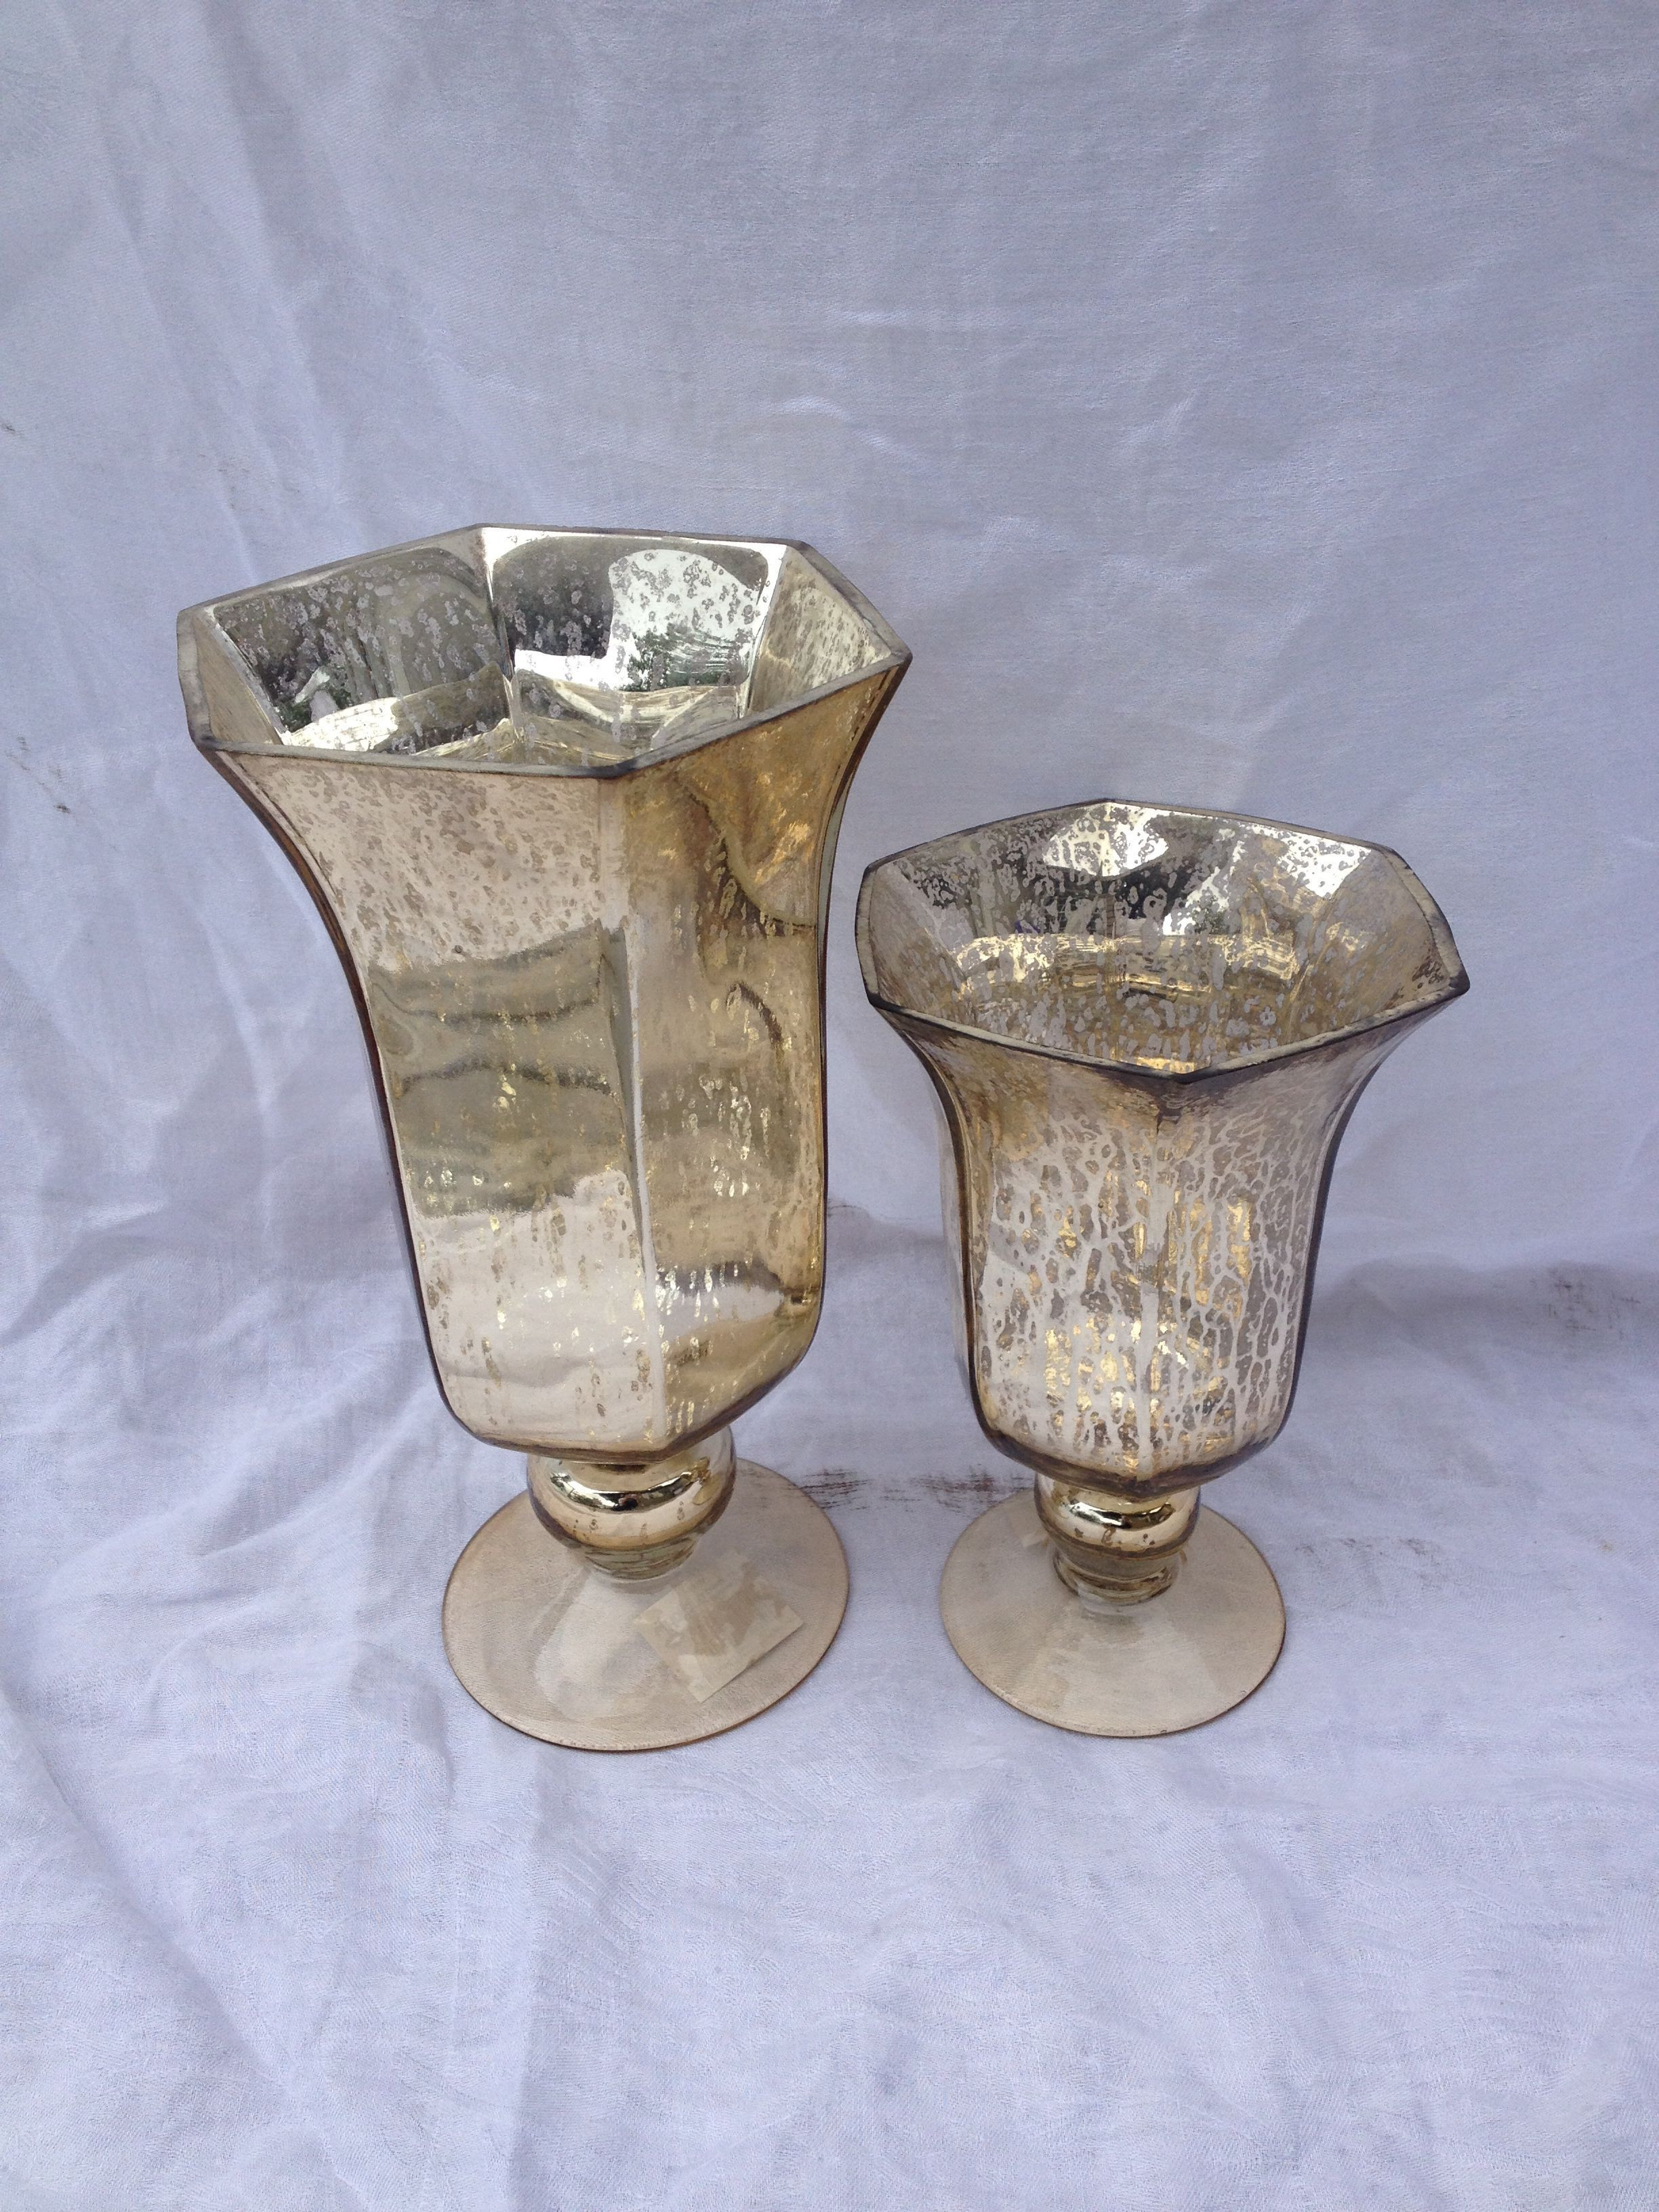 26 Lovely Bronze Vases for Sale 2024 free download bronze vases for sale of 34 gold mercury glass vases the weekly world with regard to gold mercury glass lida vase inspiration pinterest